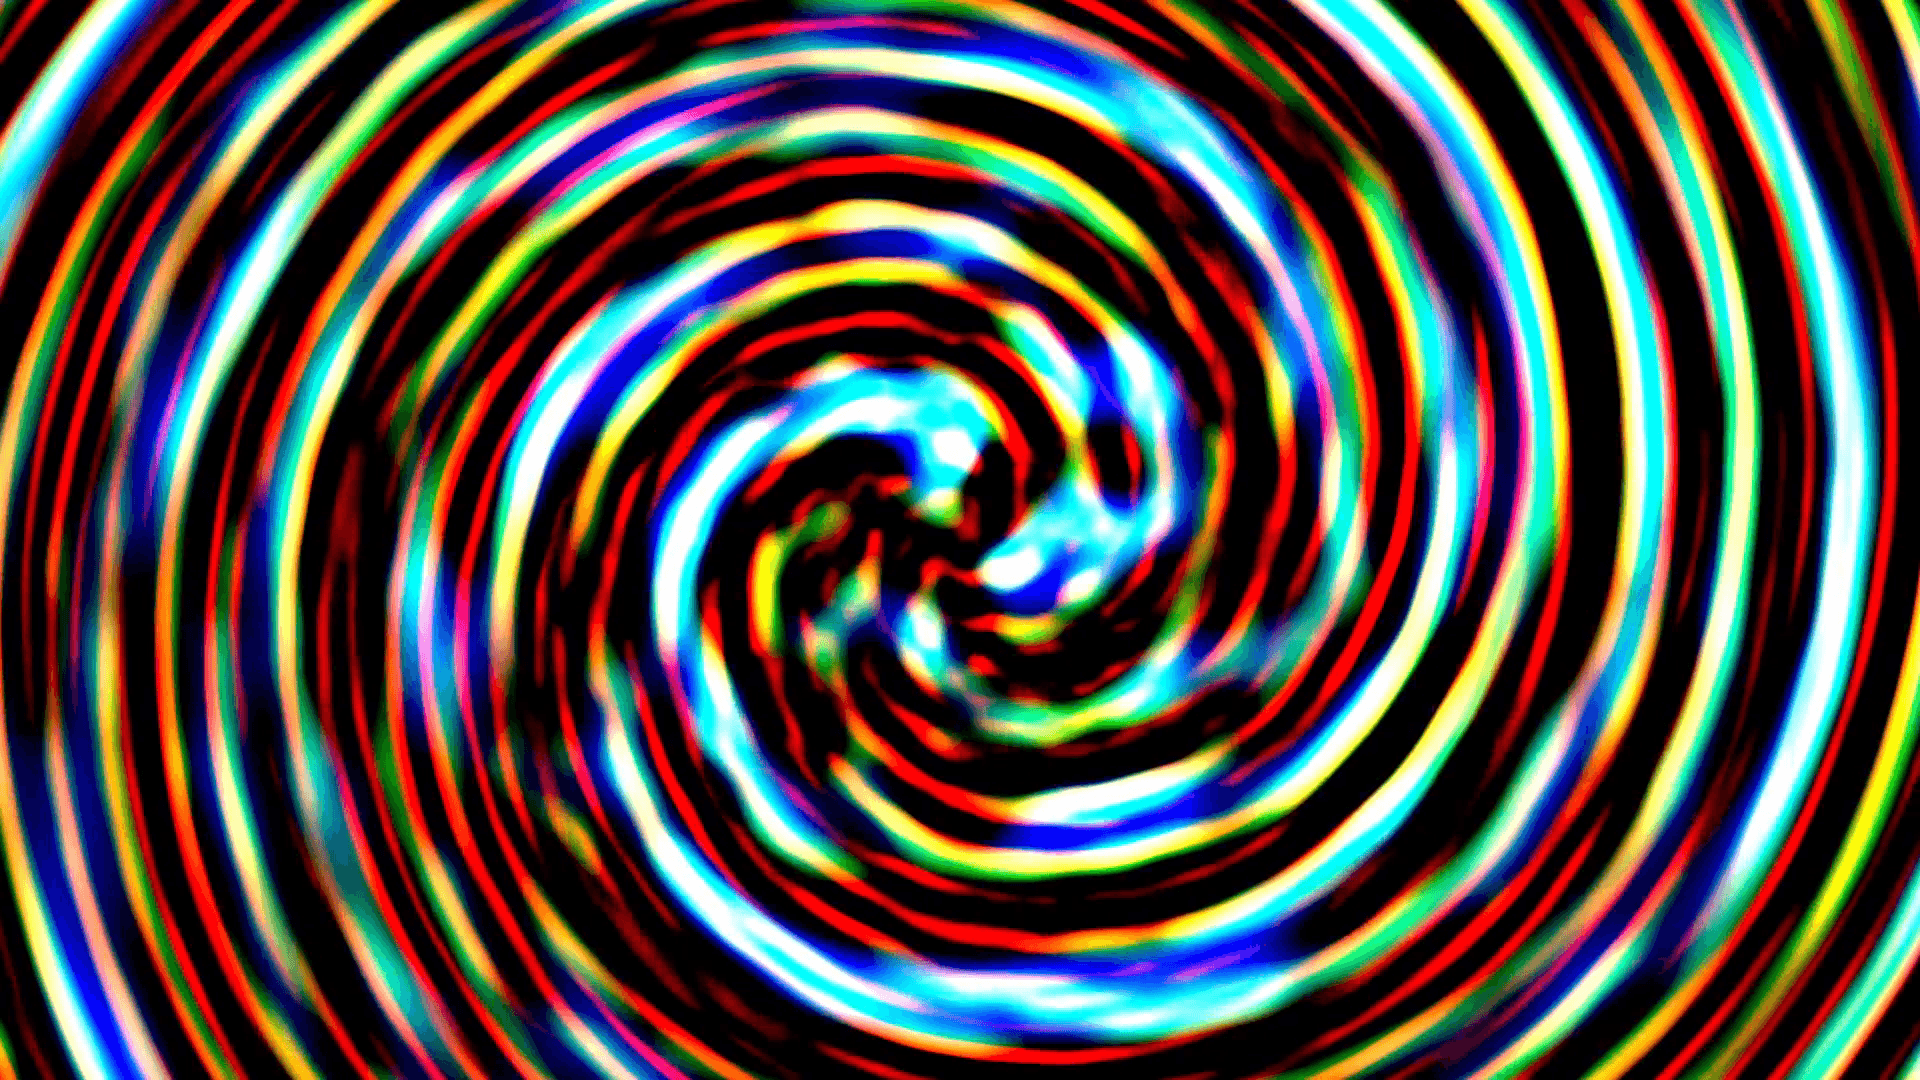 VJ hypnotic spiral tunnel seamless looping background Motion